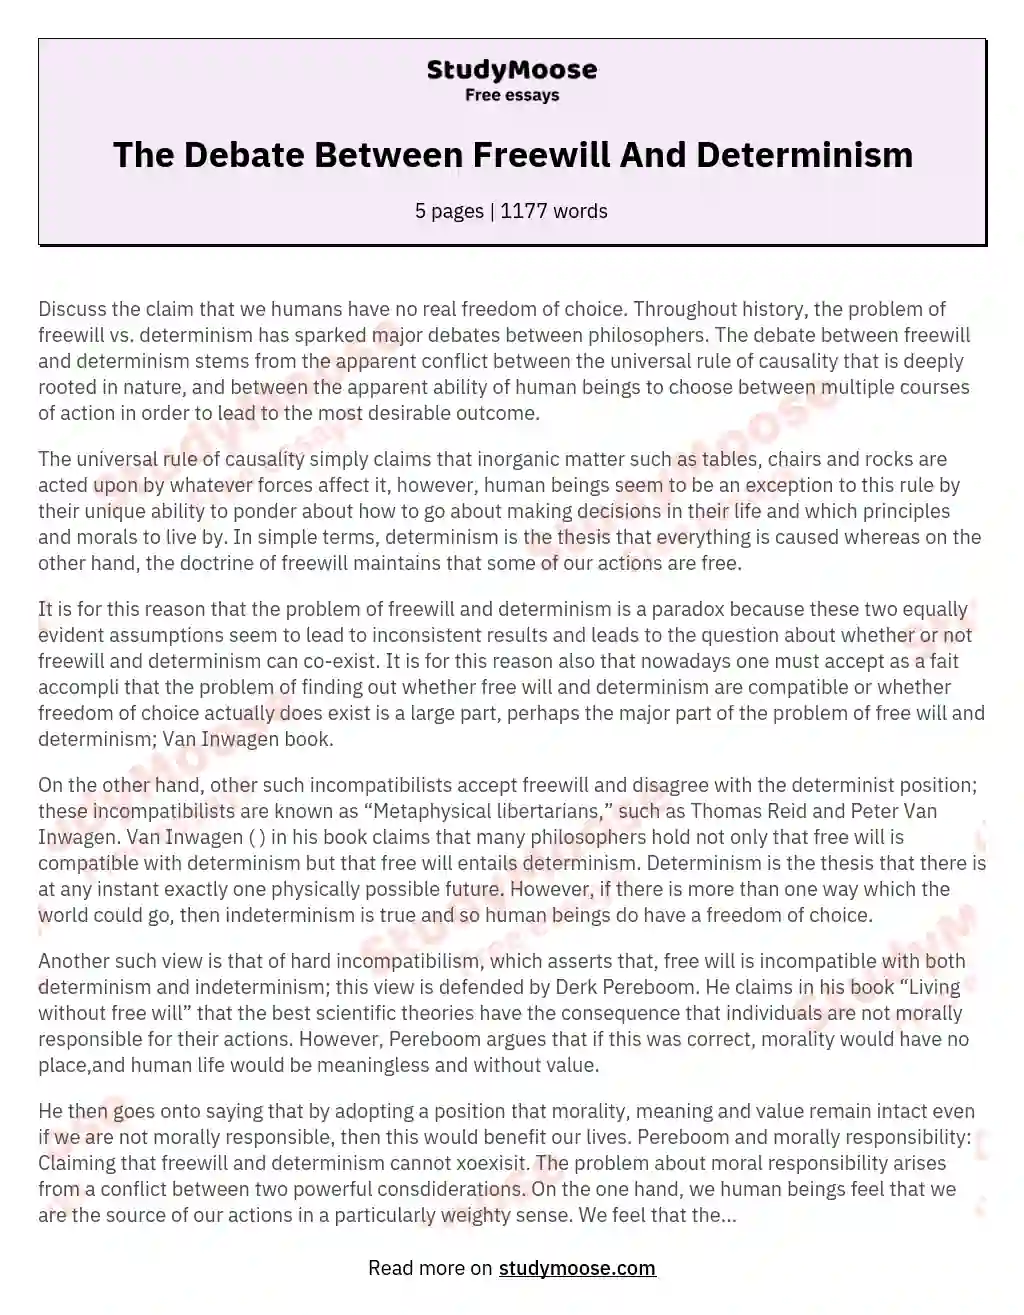 The Debate Between Freewill And Determinism essay